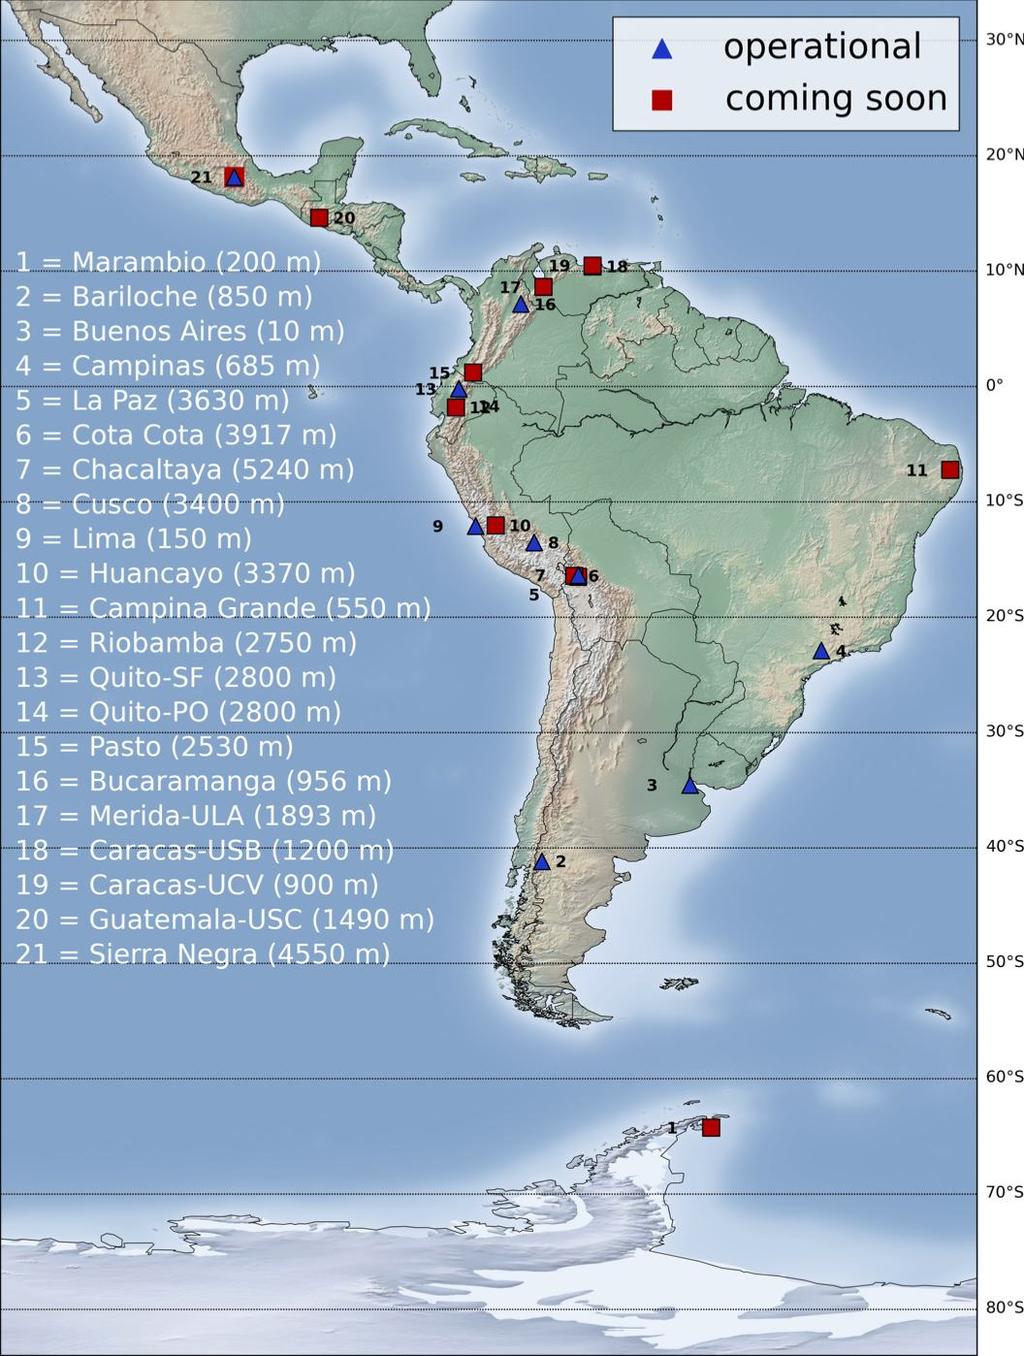 LAGO Ecuador: first results and further developments 1. Background The Latin American Giant Observatory LAGO project is a recent organization created on 2005.